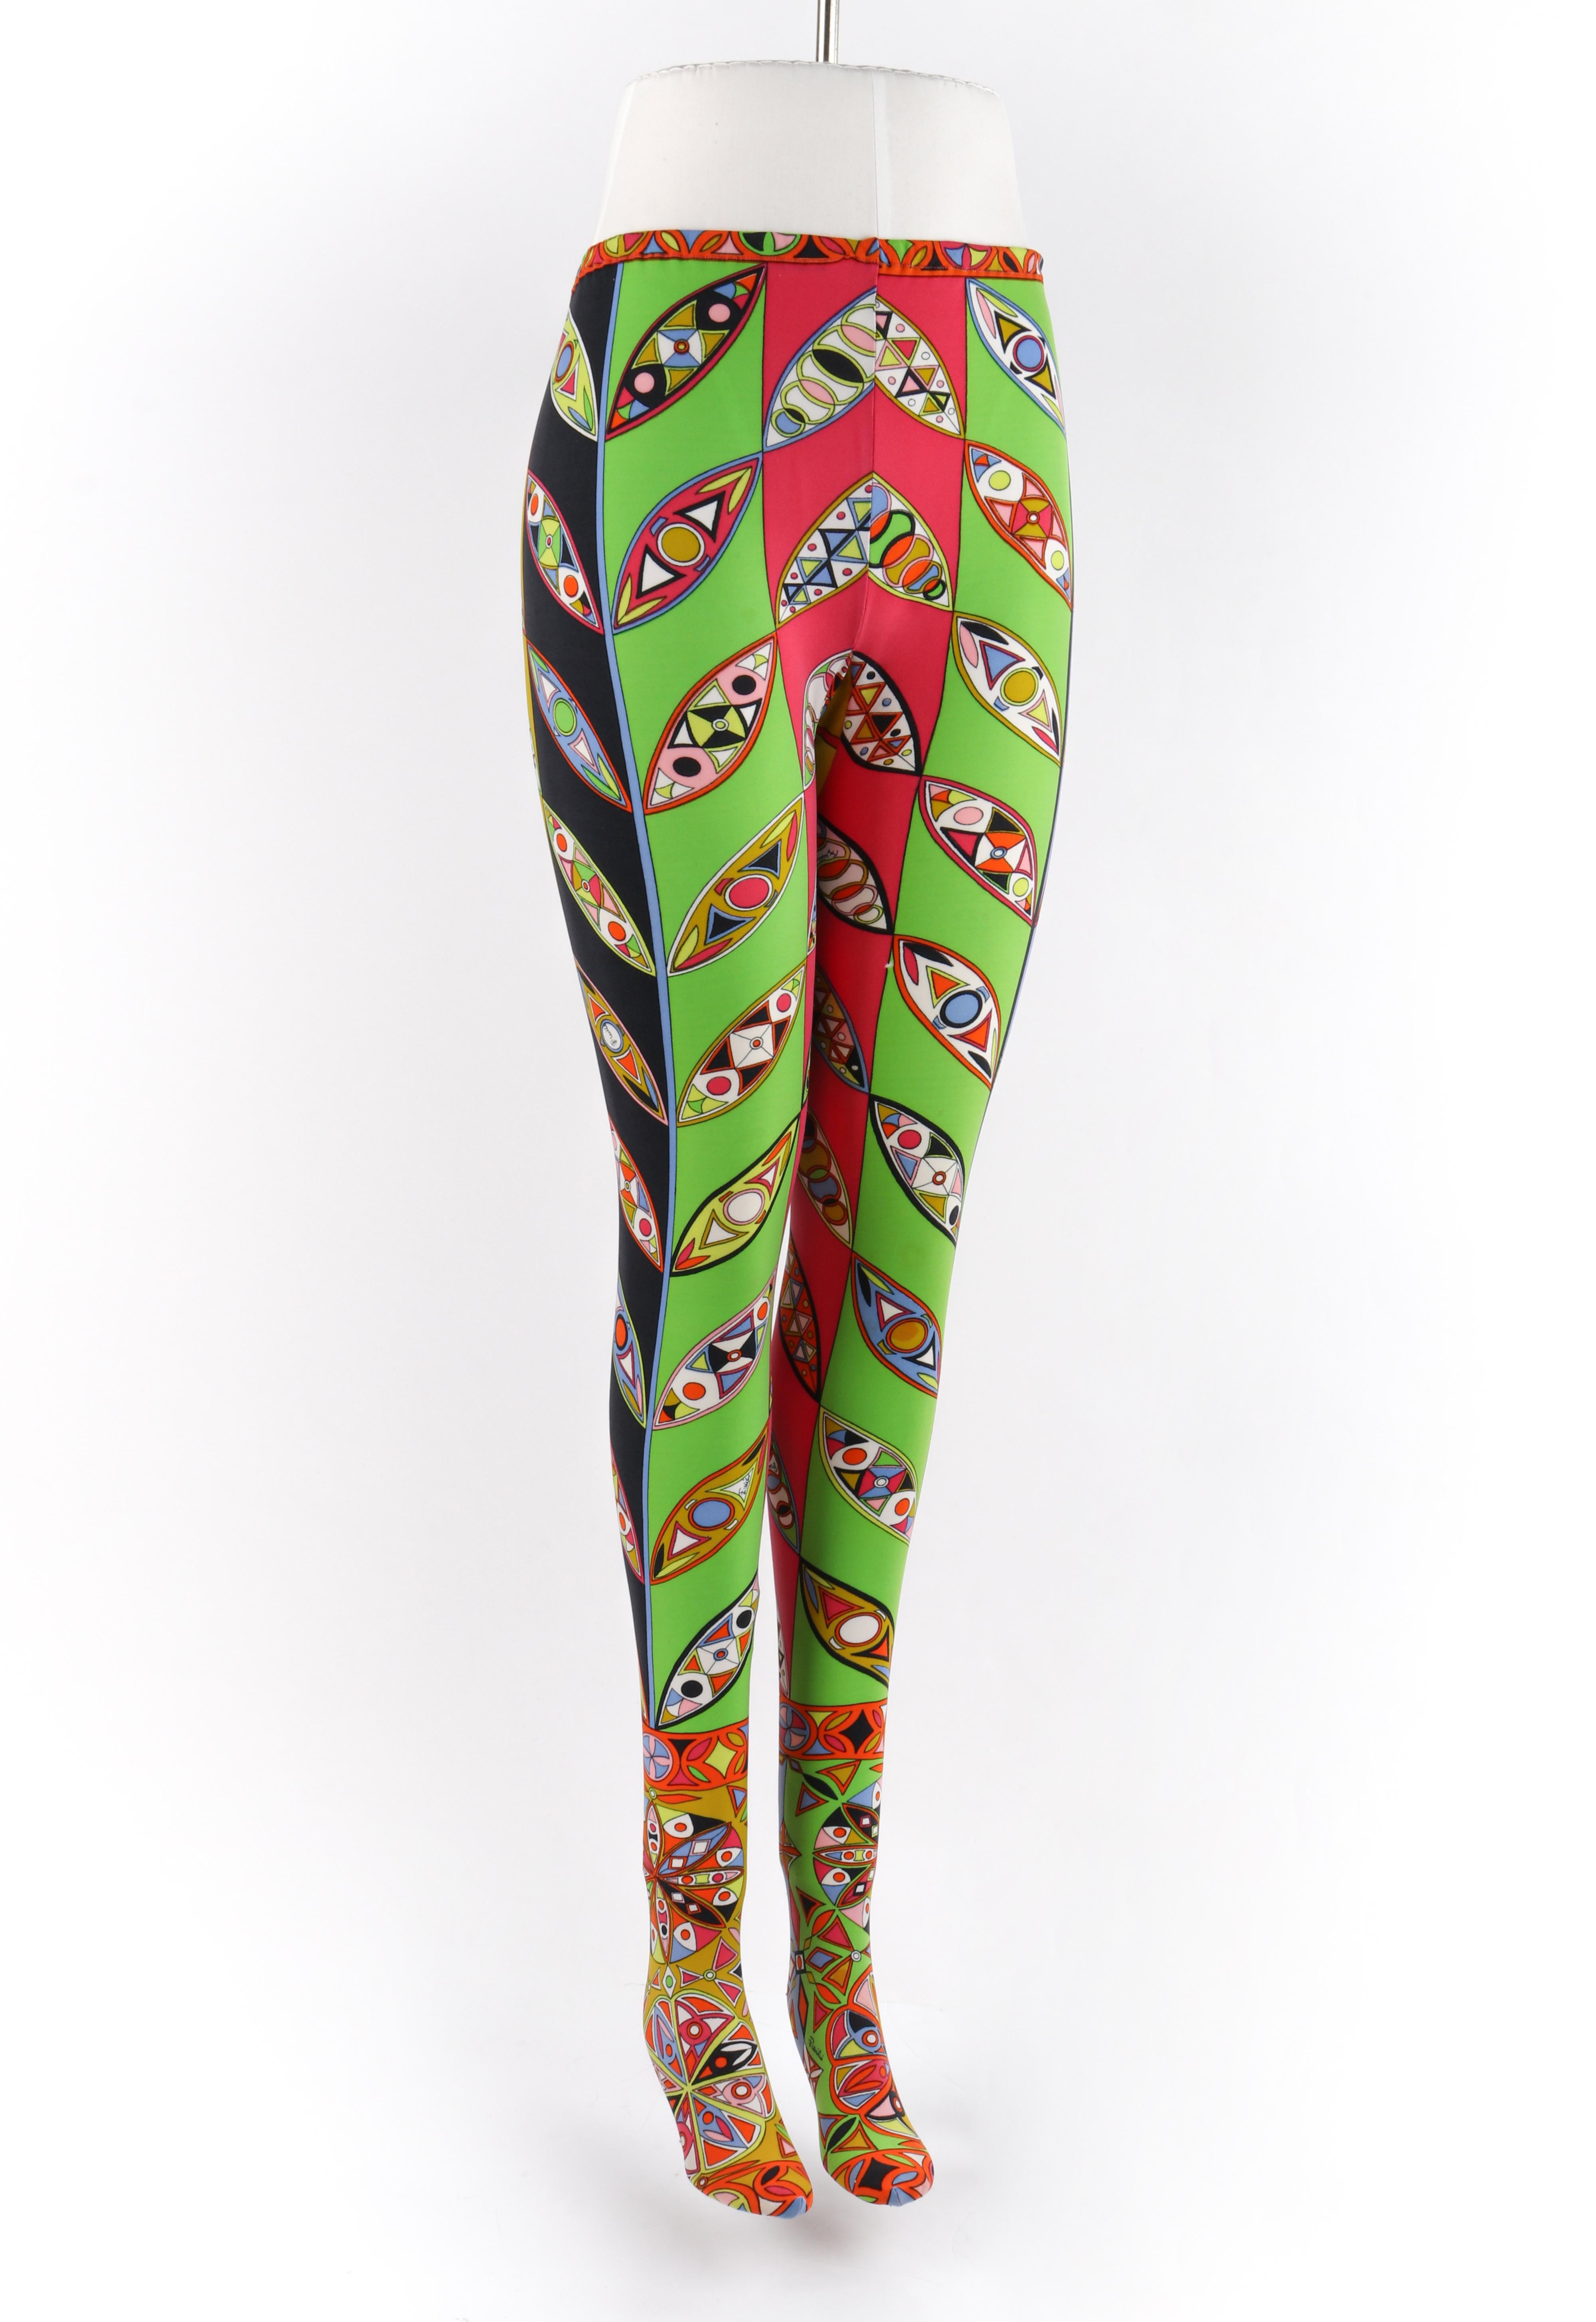 EMILIO PUCCI c.1960’s Multicolor Signature Kaleidoscope Print Stocking Leggings
Circa: 1960’s
Label(s): Emilio Pucci, Saks Fifth Avenue
Designer: Emilio Pucci
Style: Tights/leggings
Color(s): Shades of white, blue, pink, green, orange, yellow, and